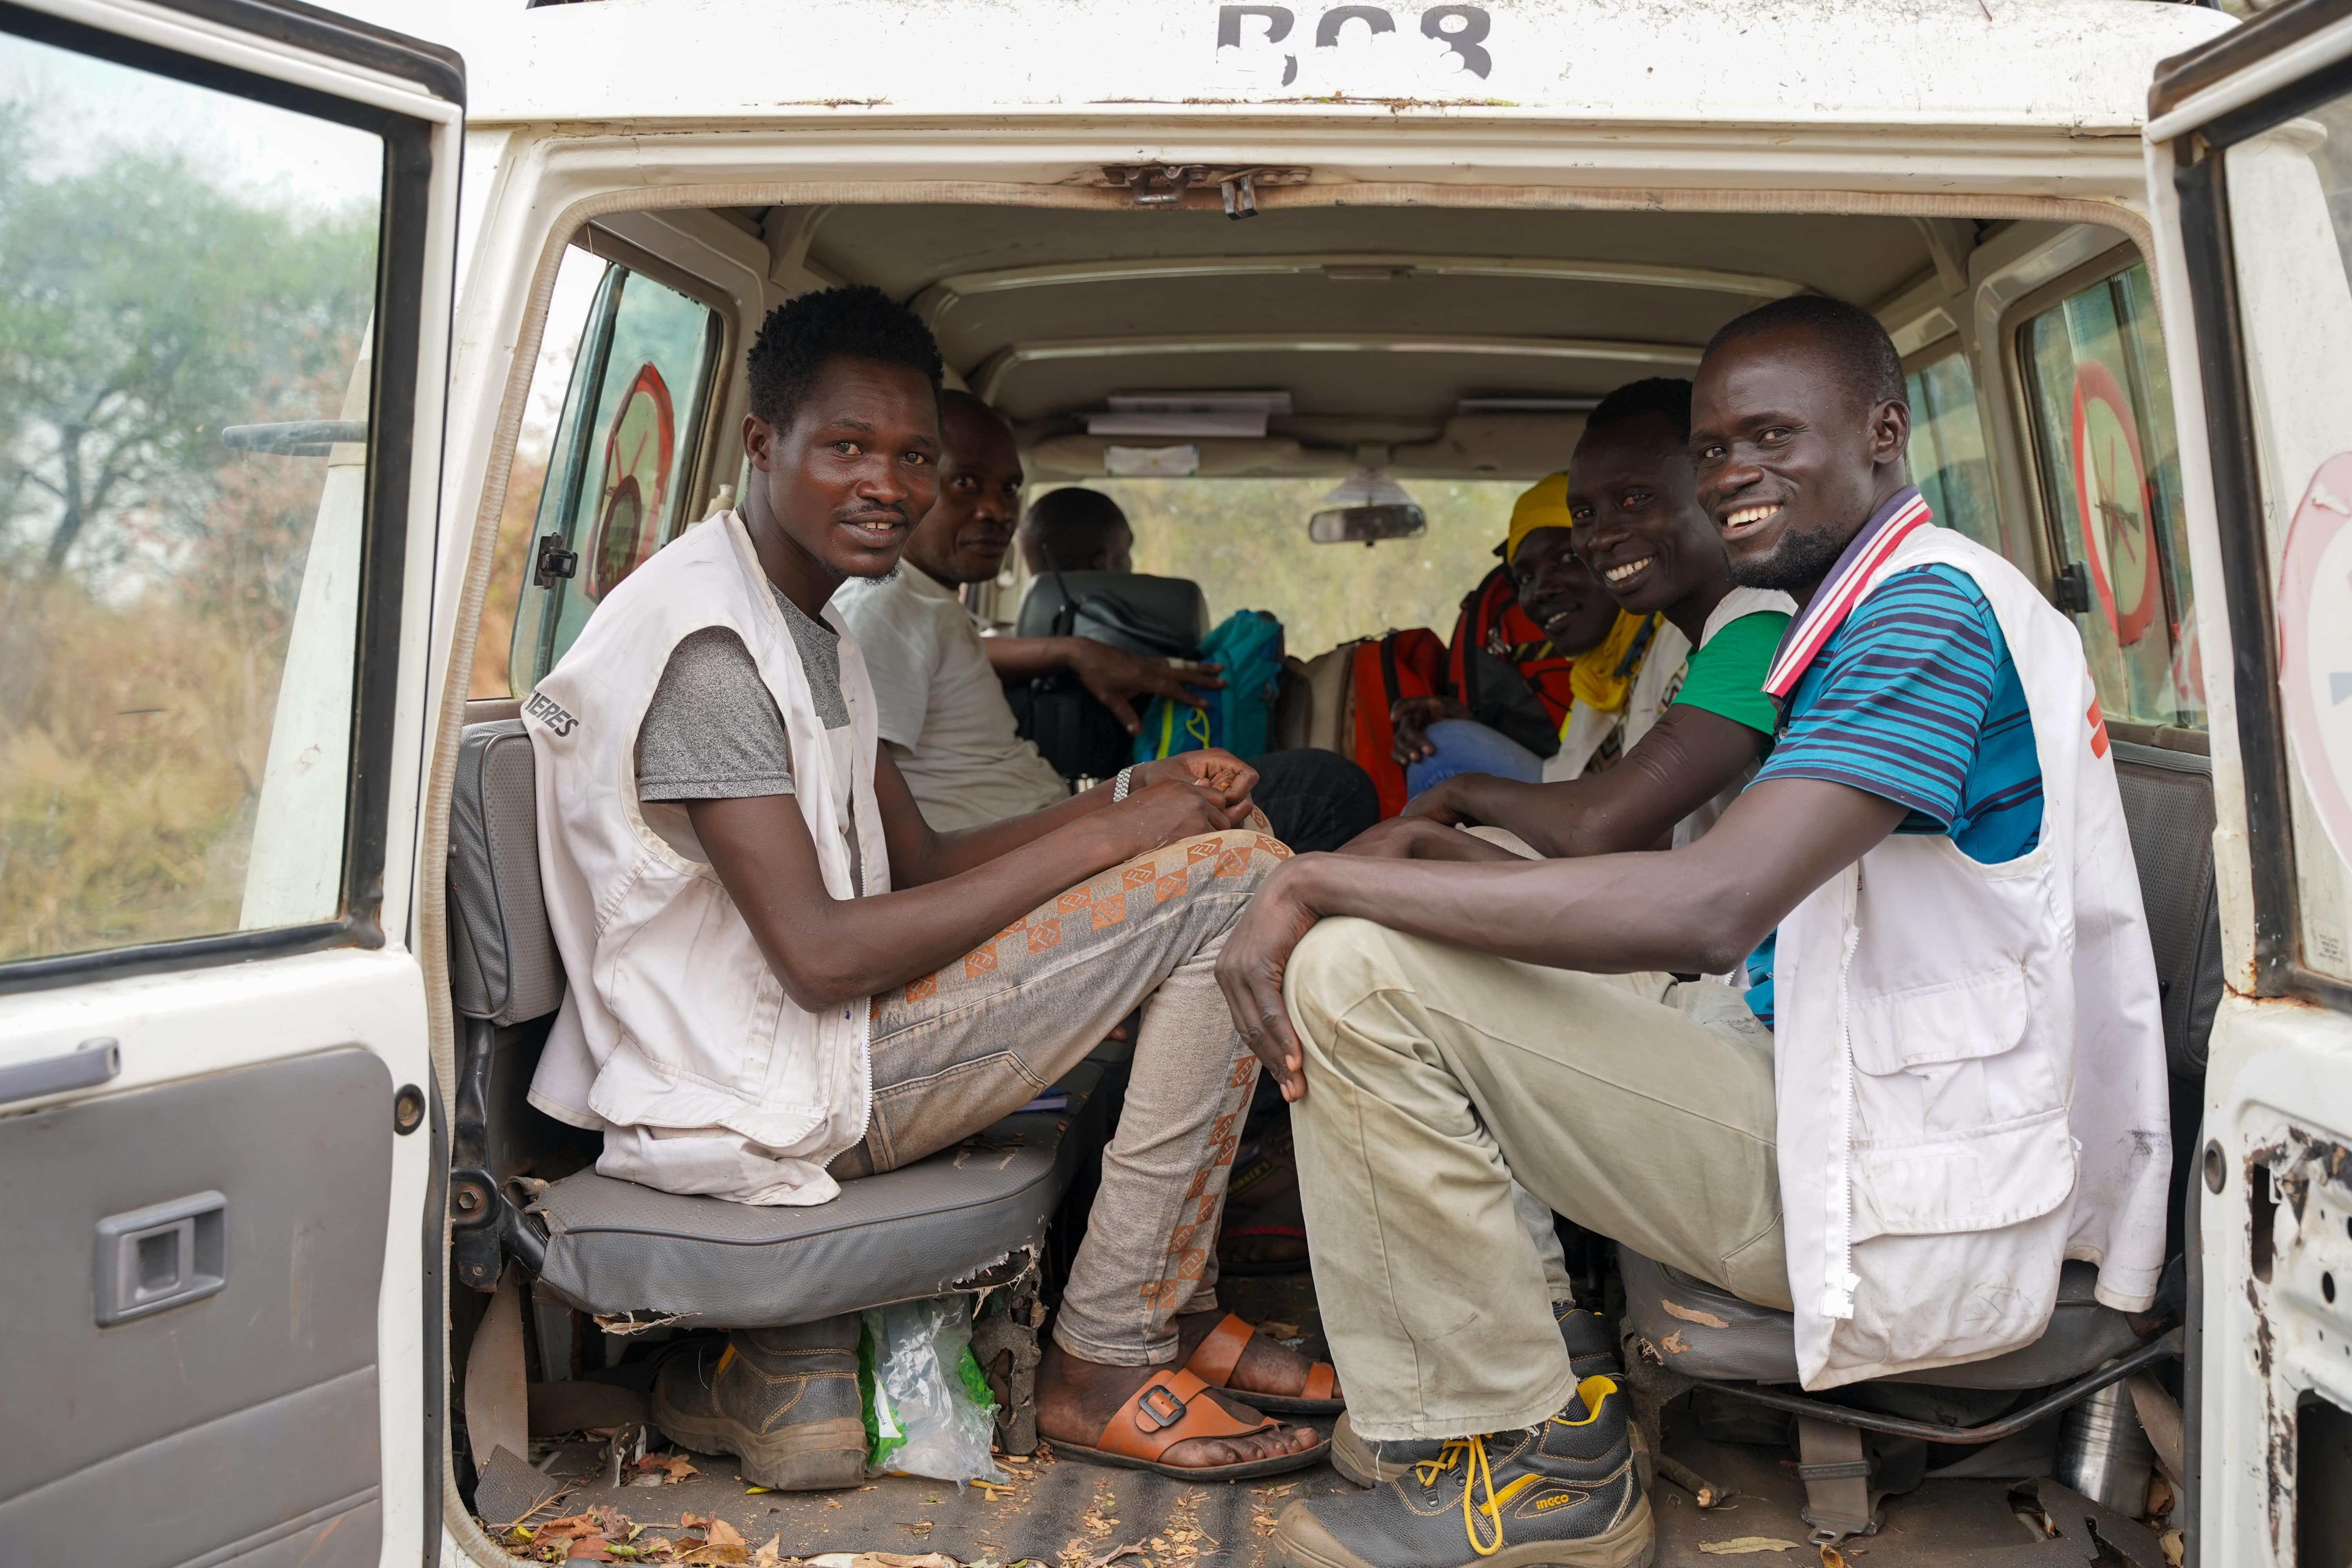 Cattle Keepers in South Sudan: MSF health promotion and WATSAN teams sit at the back of an MSF car during a four-day outreach visit among cattle keepers communities in Labarab, Greater Pibor Administrative Area.